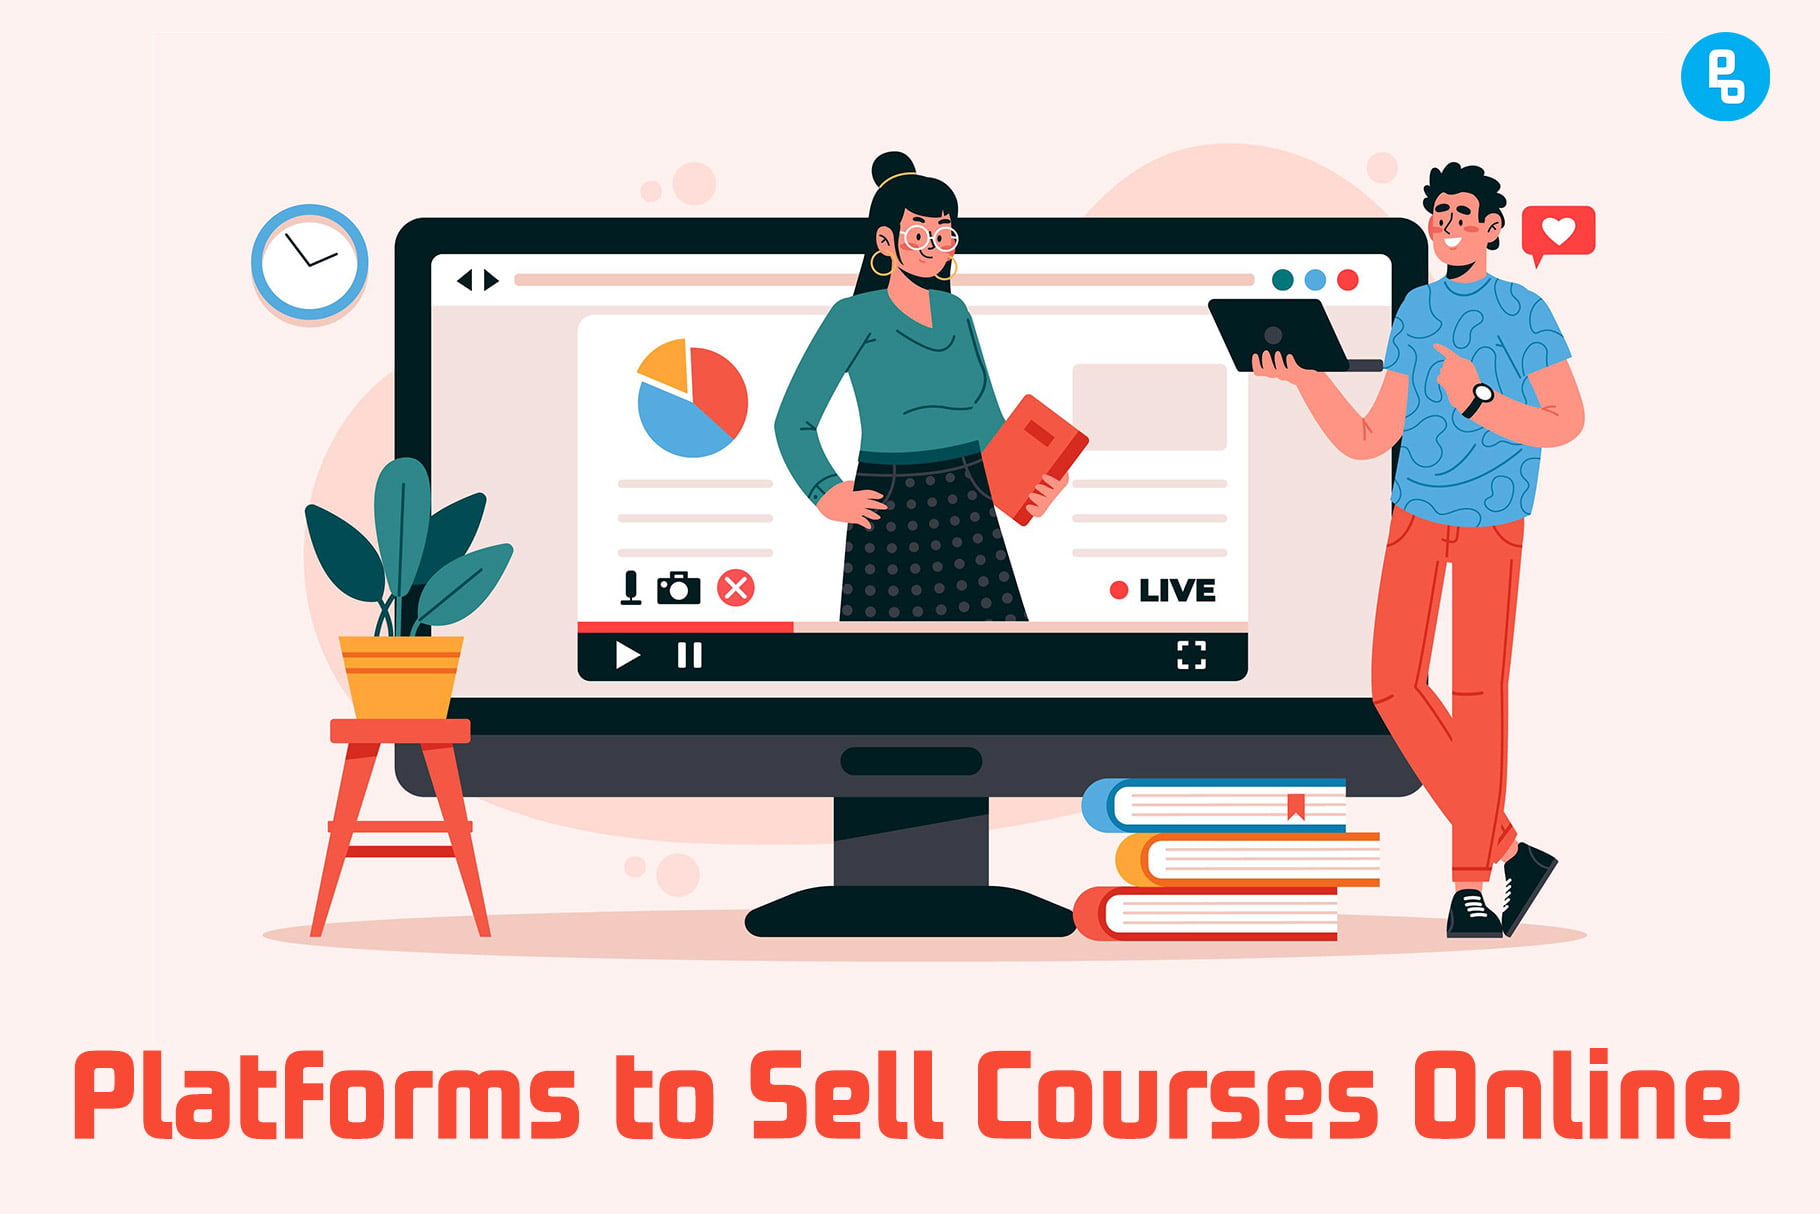 As a designer, you know how important it is to share your knowledge and help others improve their skills. Selling an online design course helps you do just that, while also making some money on the side.